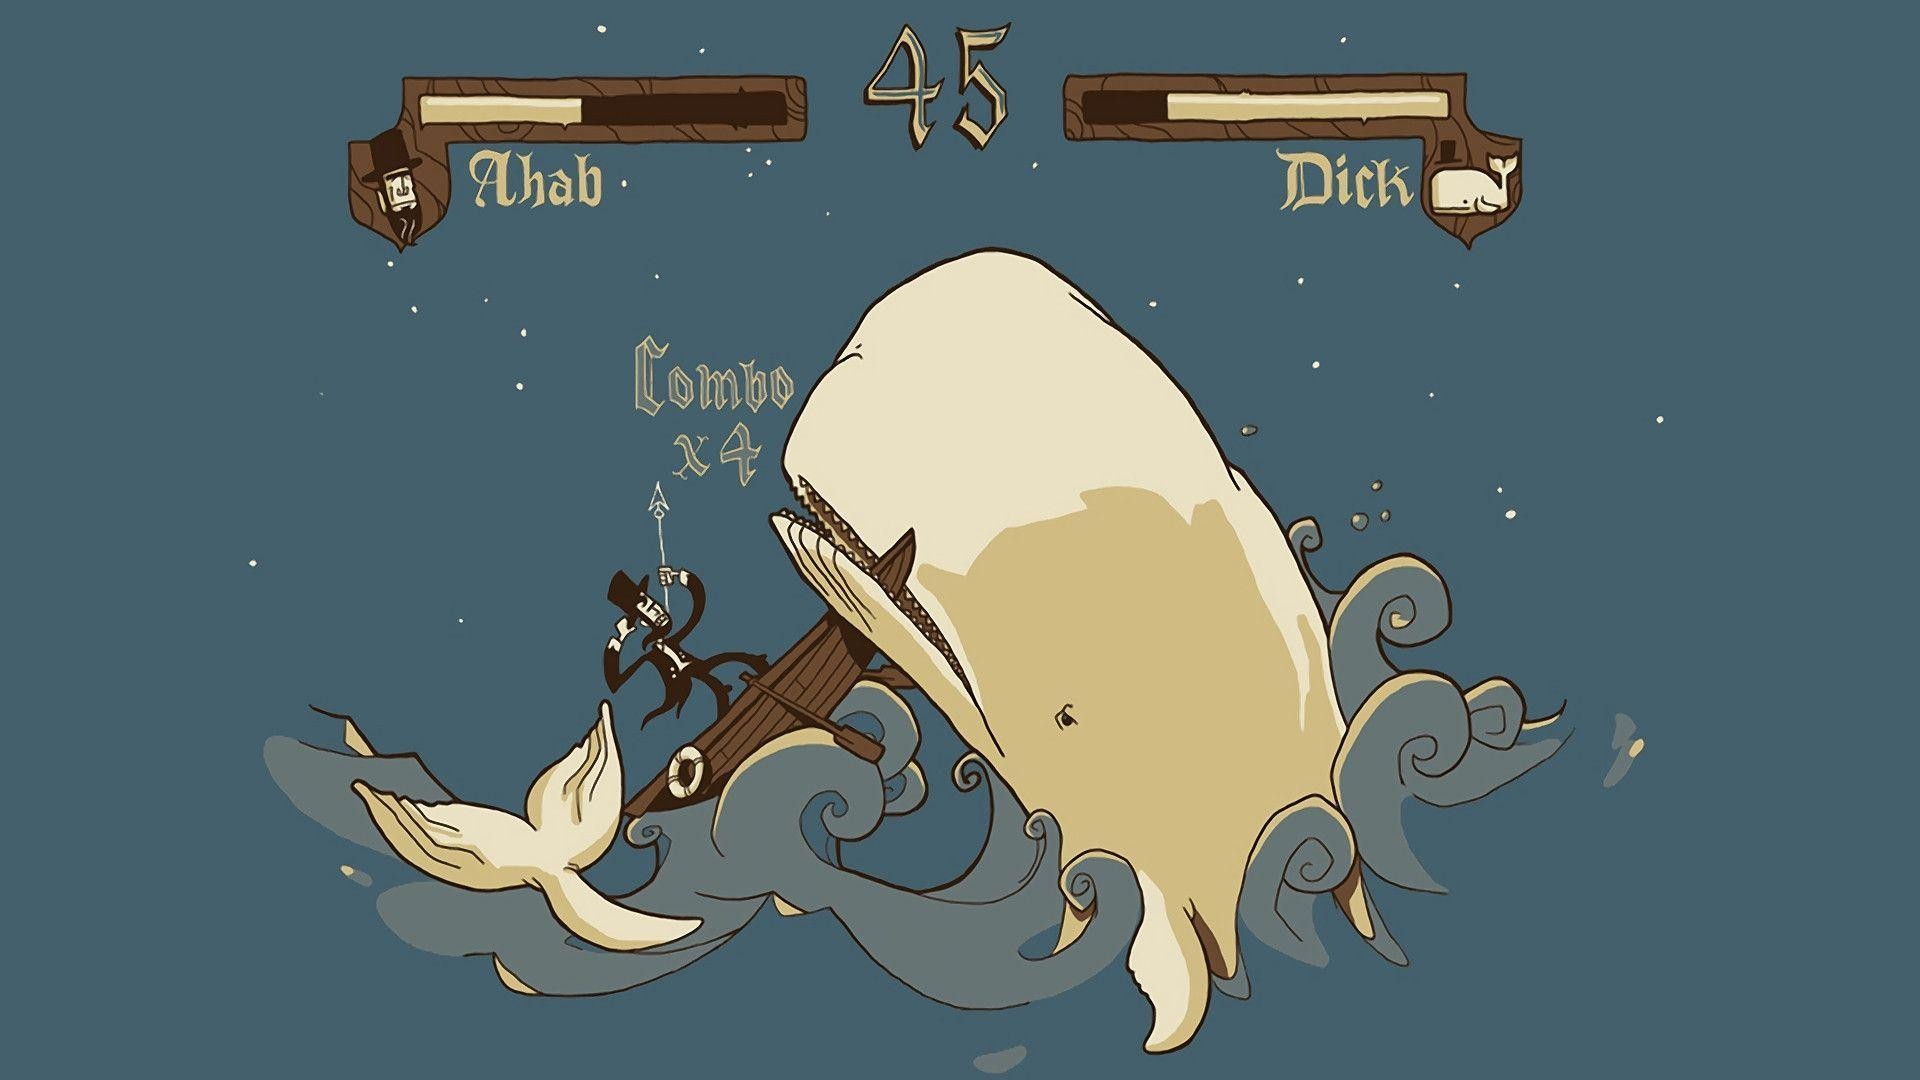 Moby dick game dick